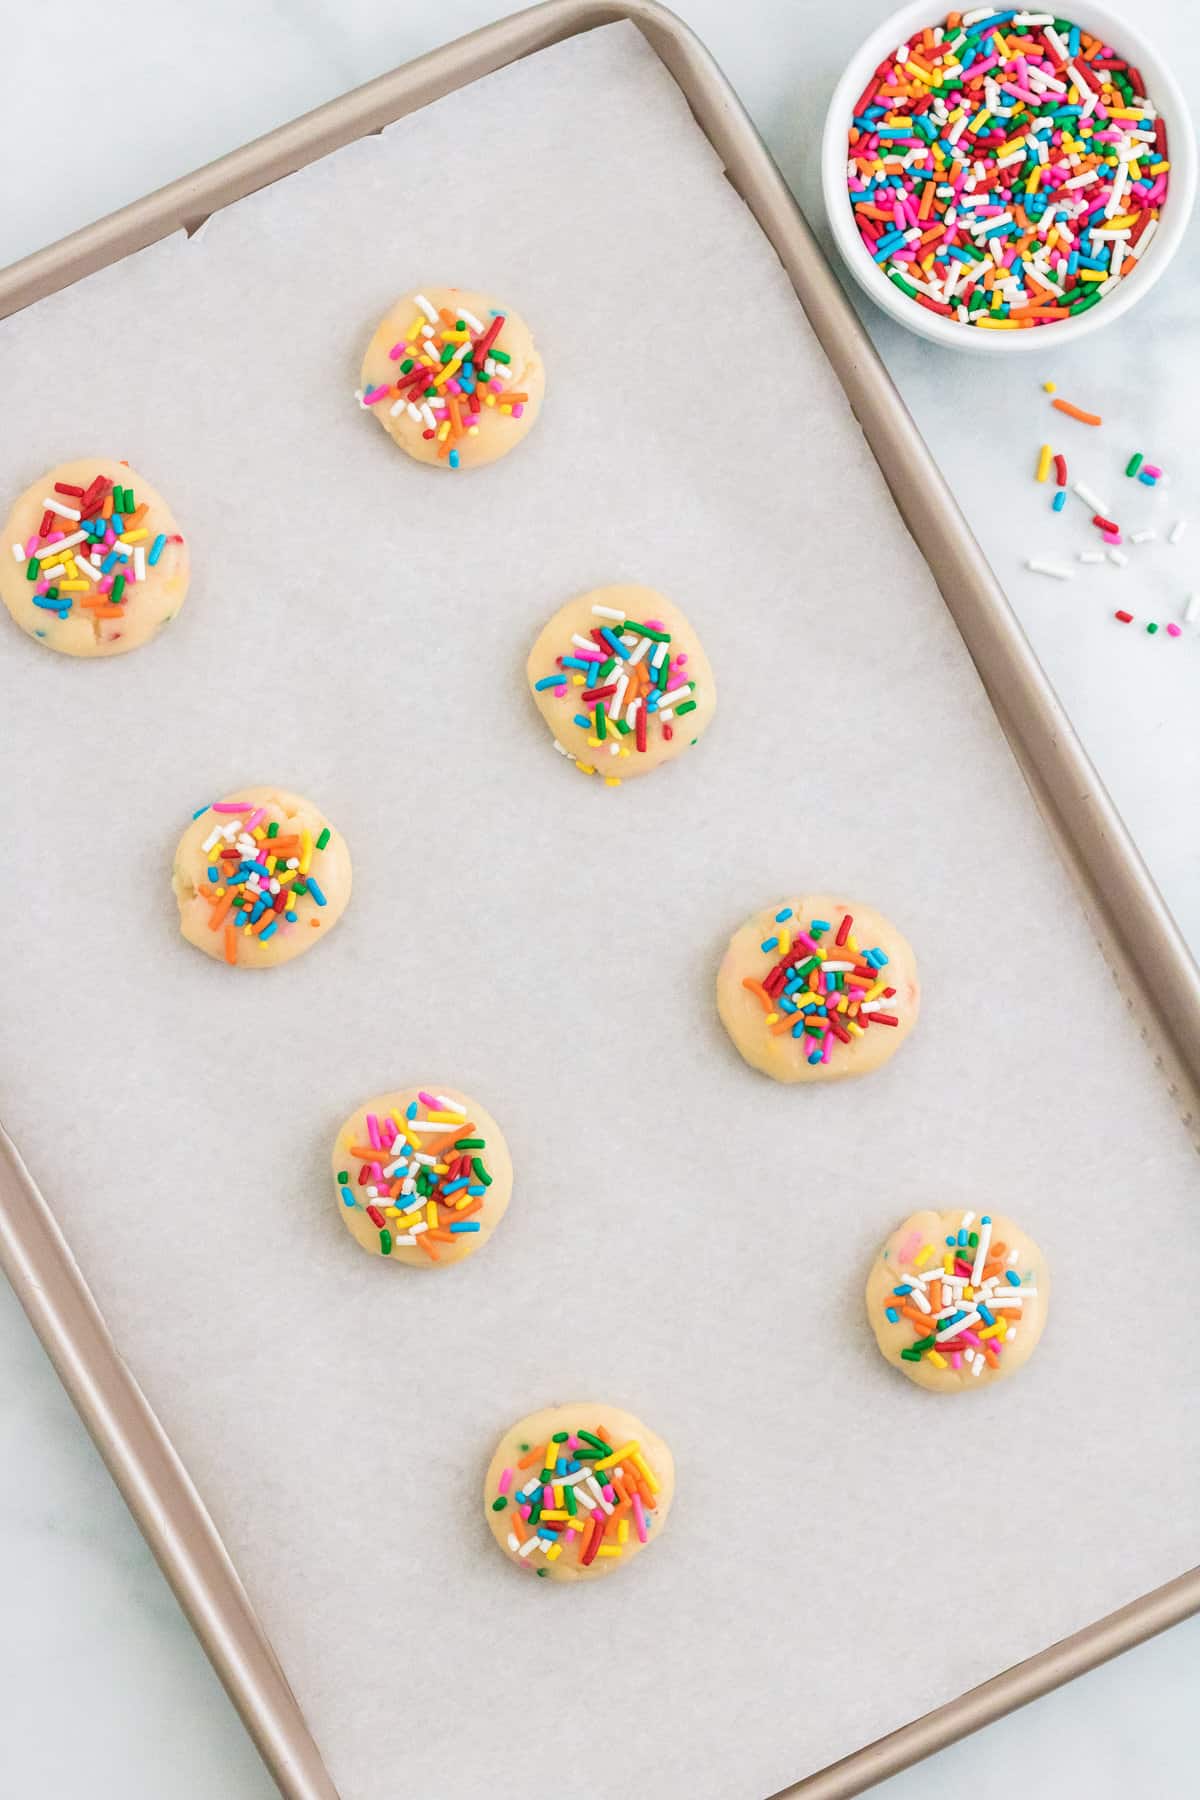 Rainbow sprinkled topped Funfetti cookie dough on lined baking sheet. The dough is pressed down slightly into hockey-puck shaped discs. 